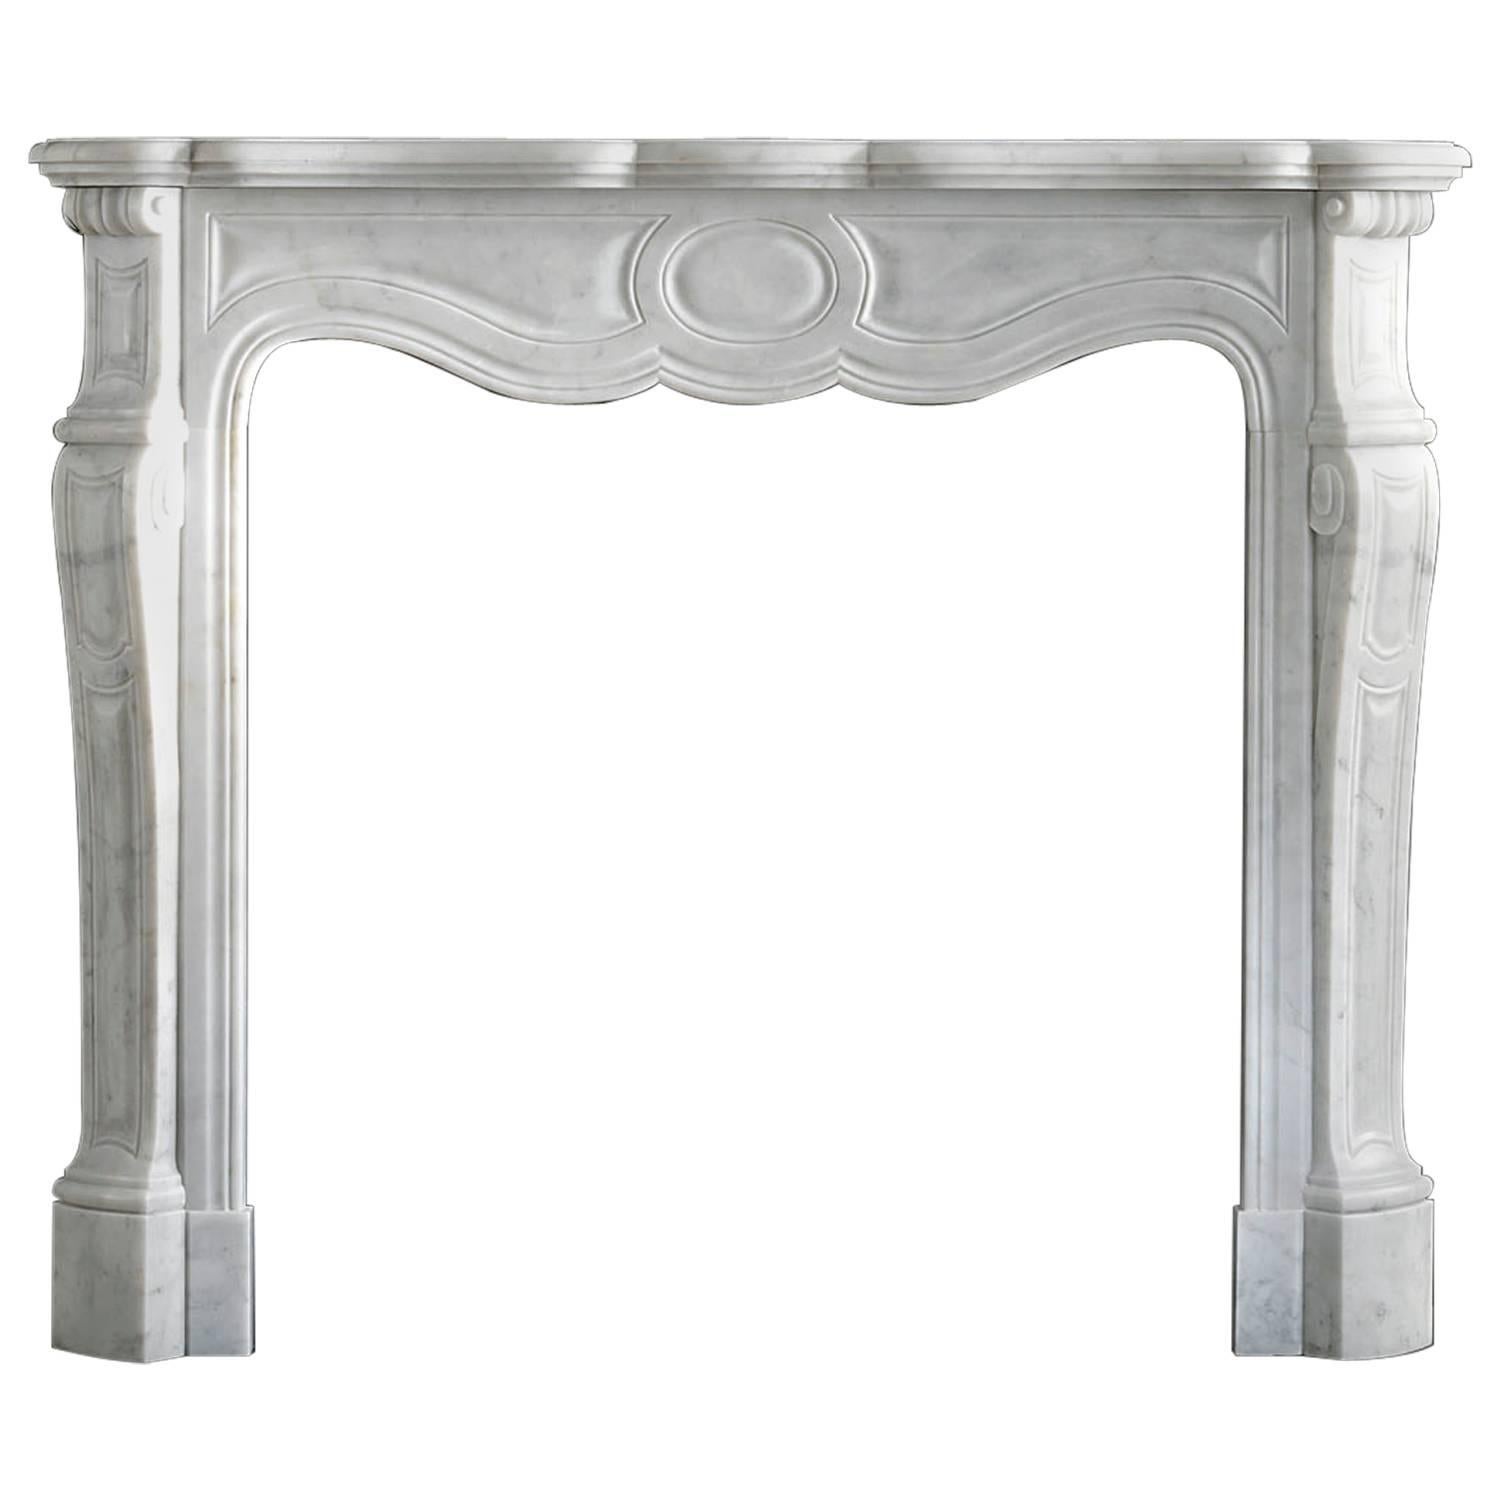 18th Century Reproduction, Louis XV Style French Mantel (the Pompadour)